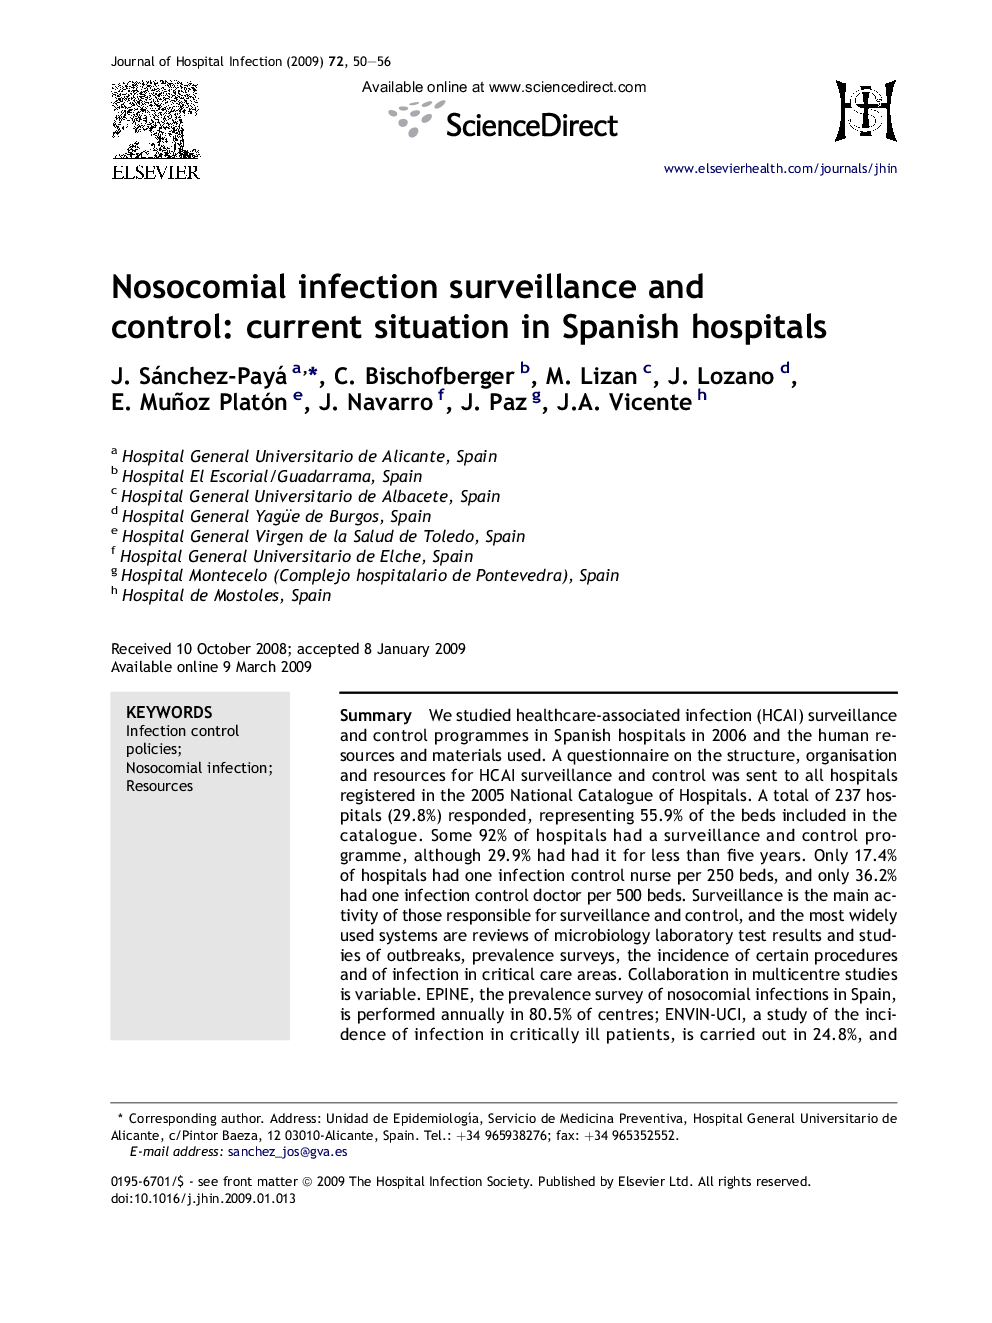 Nosocomial infection surveillance and control: current situation in Spanish hospitals